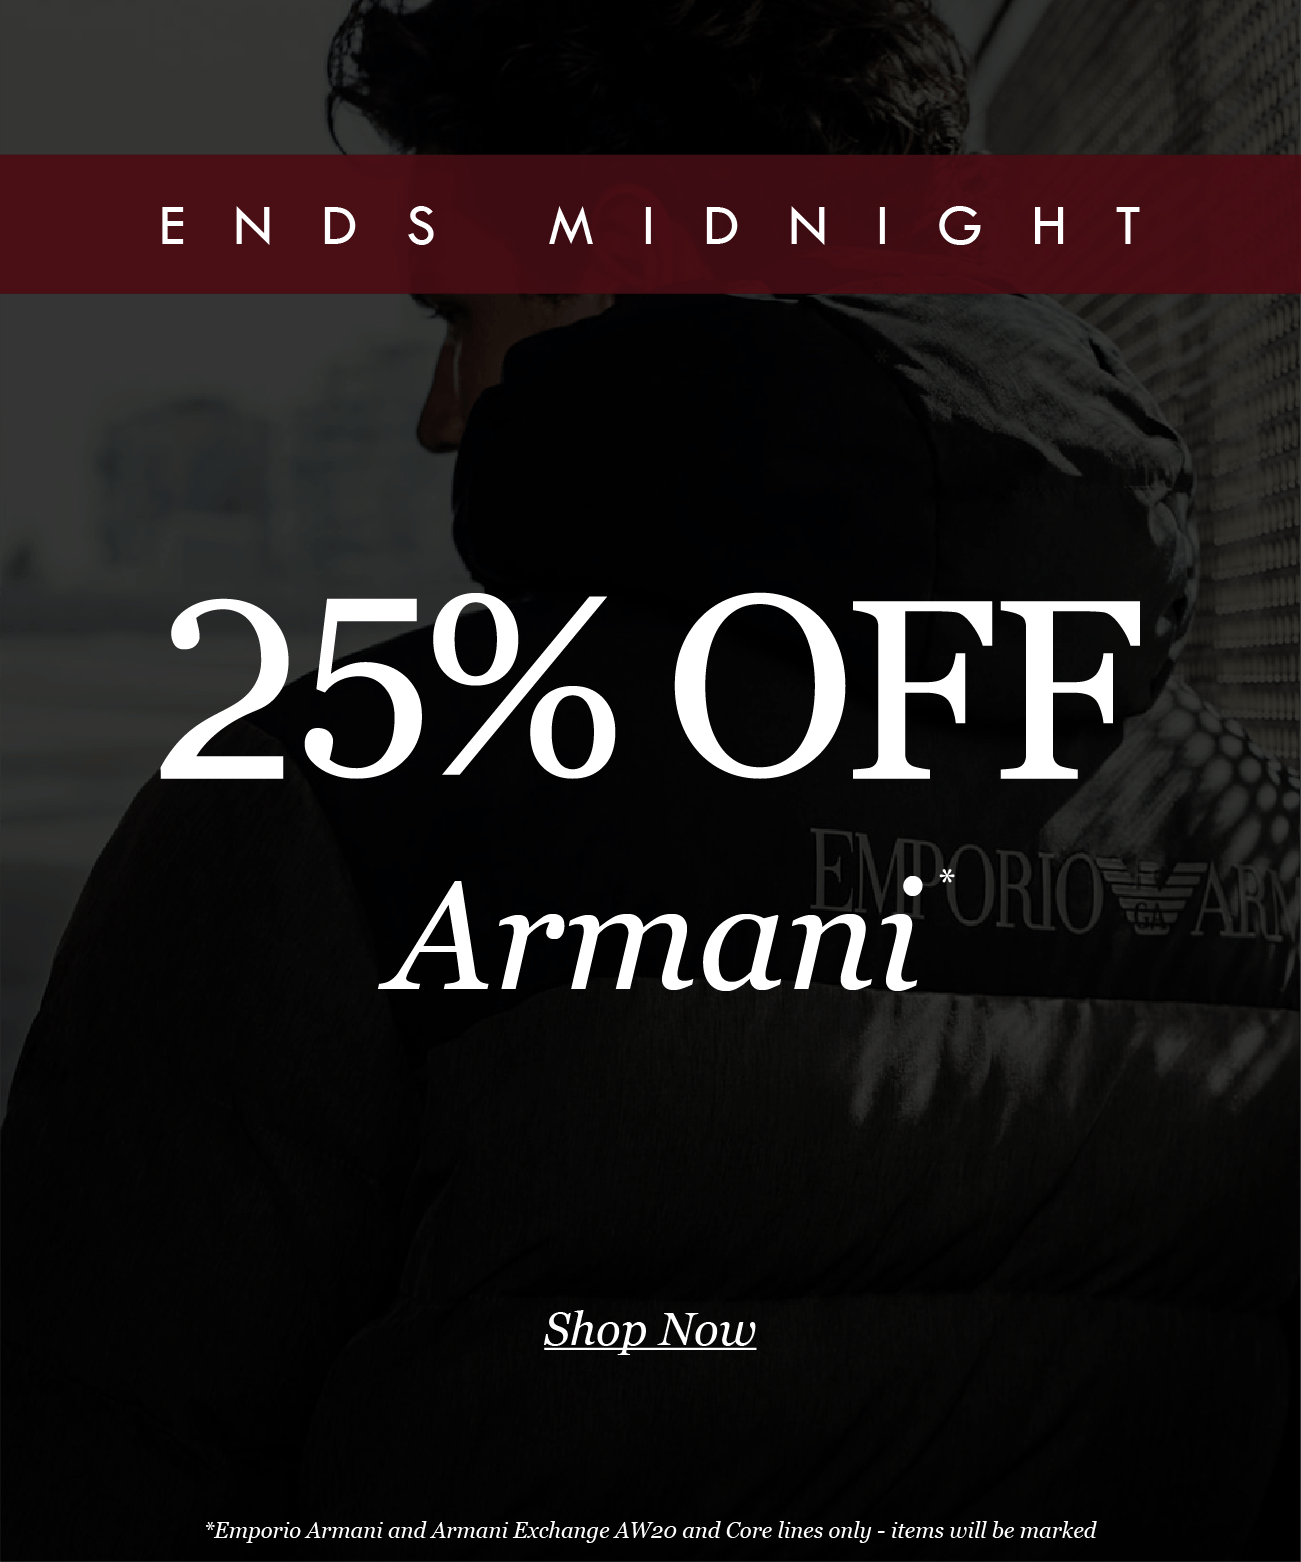 ENDS MIDNIGHT
25% OFF
Armani*

Shop Now
*Emporio Armani and Armani Exchange AW20 and Core lines only - items will be marked